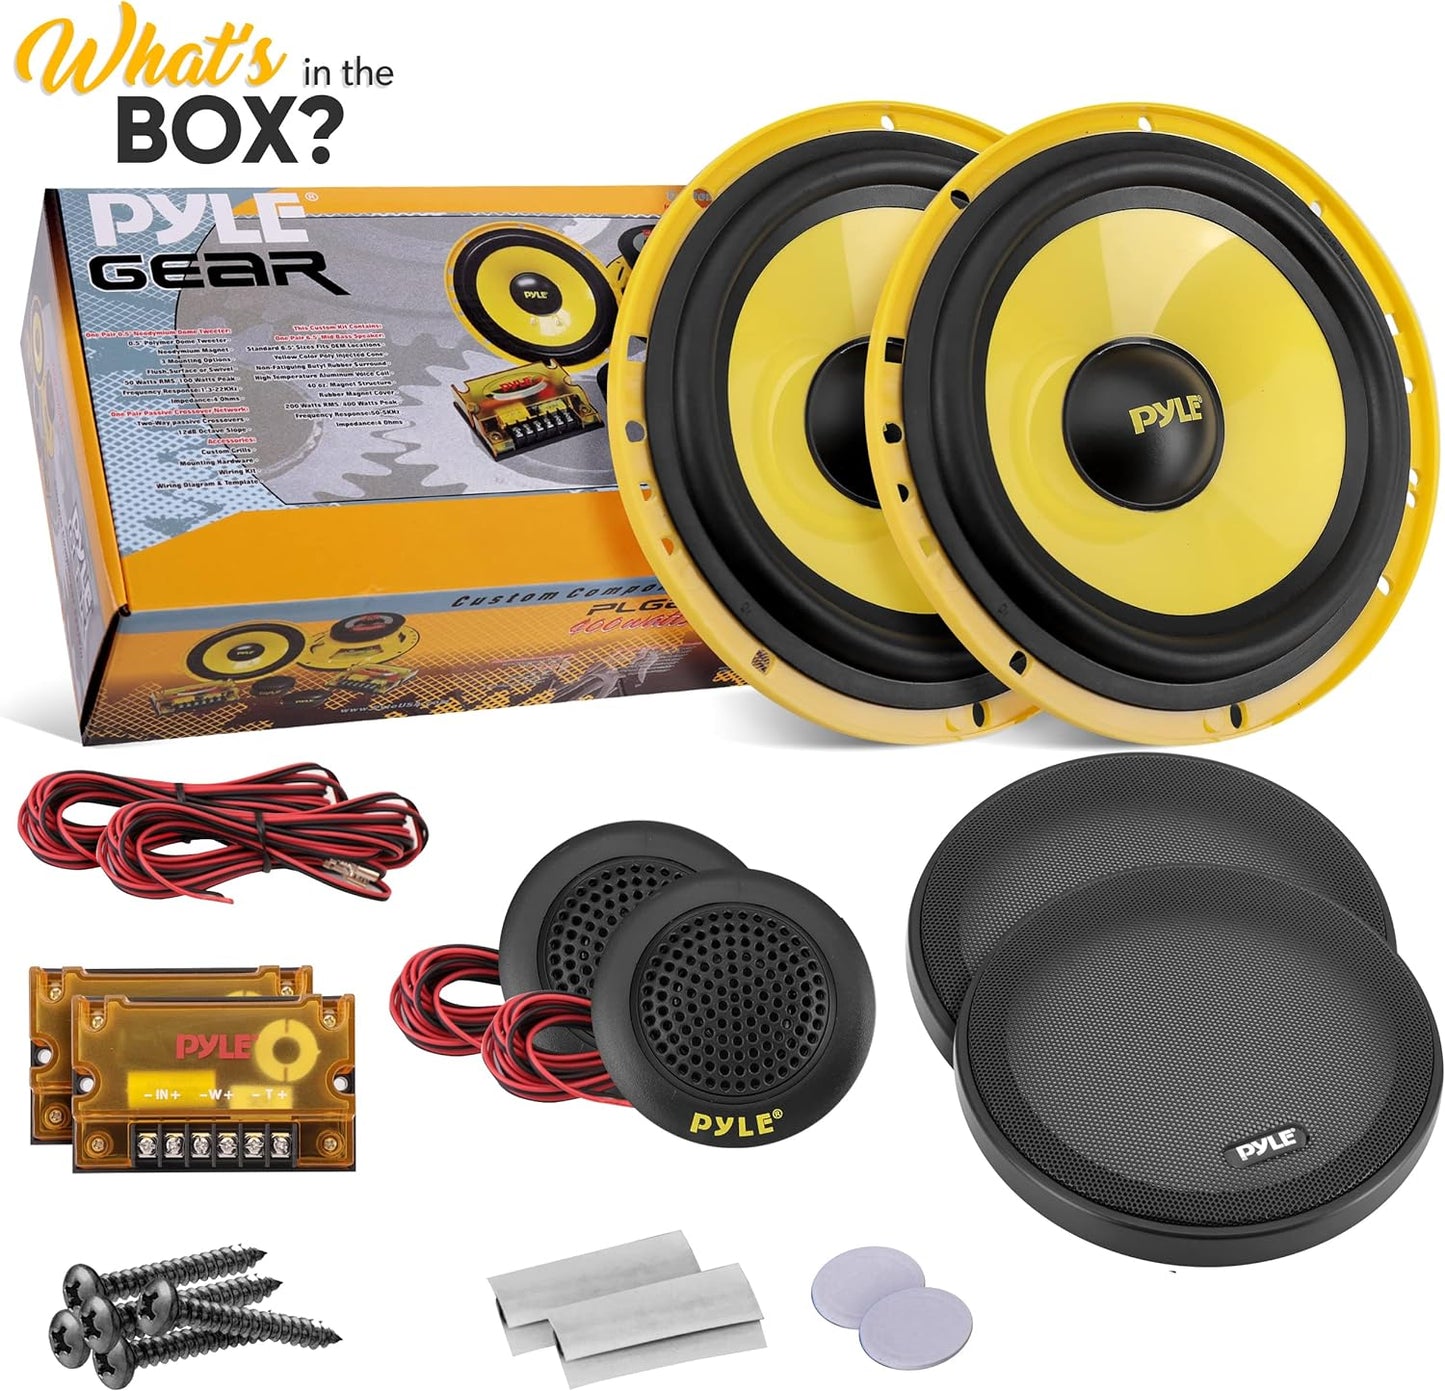 Pyle 2 Way Custom Component Speaker System - 6.5” 400 Watt, with Electroplated Plastic Basket, Butyl Rubber Surround & 40 Oz Magnet Structure - Wire Installation Hardware Set Included - PLG6C, Yellow